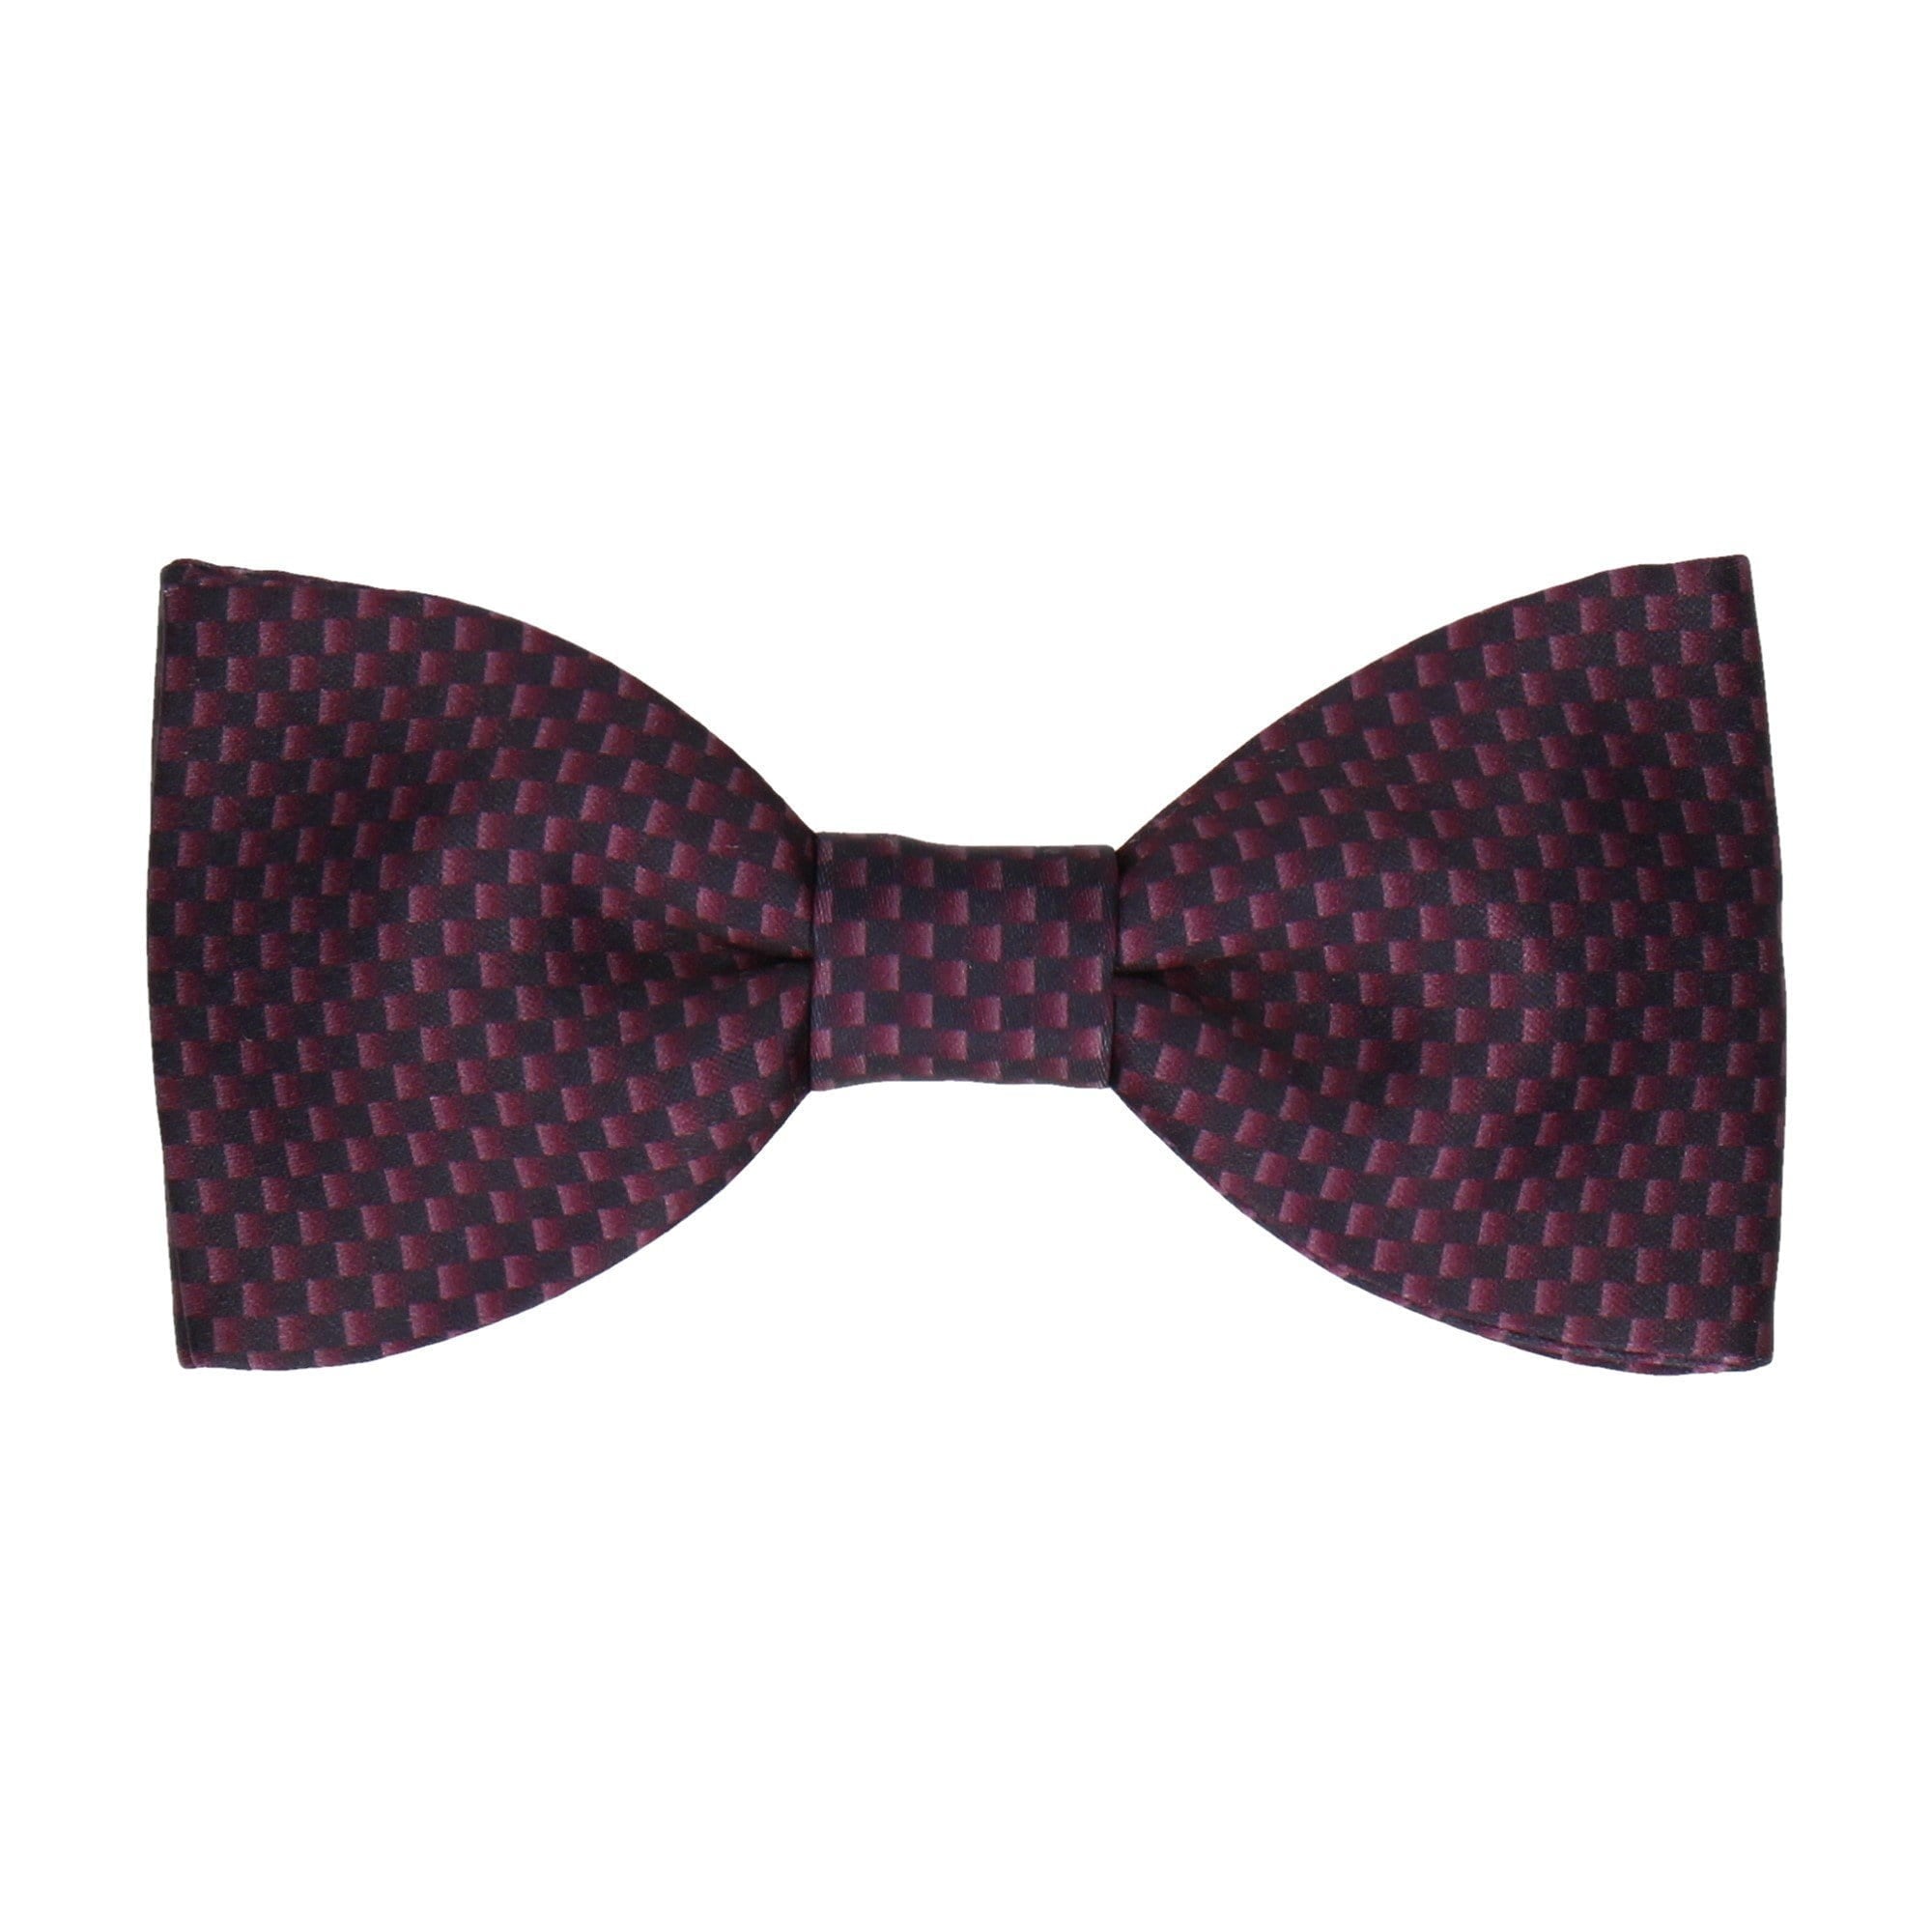 11th Doctor Cosplay | Dr Who Replica Bow Tie